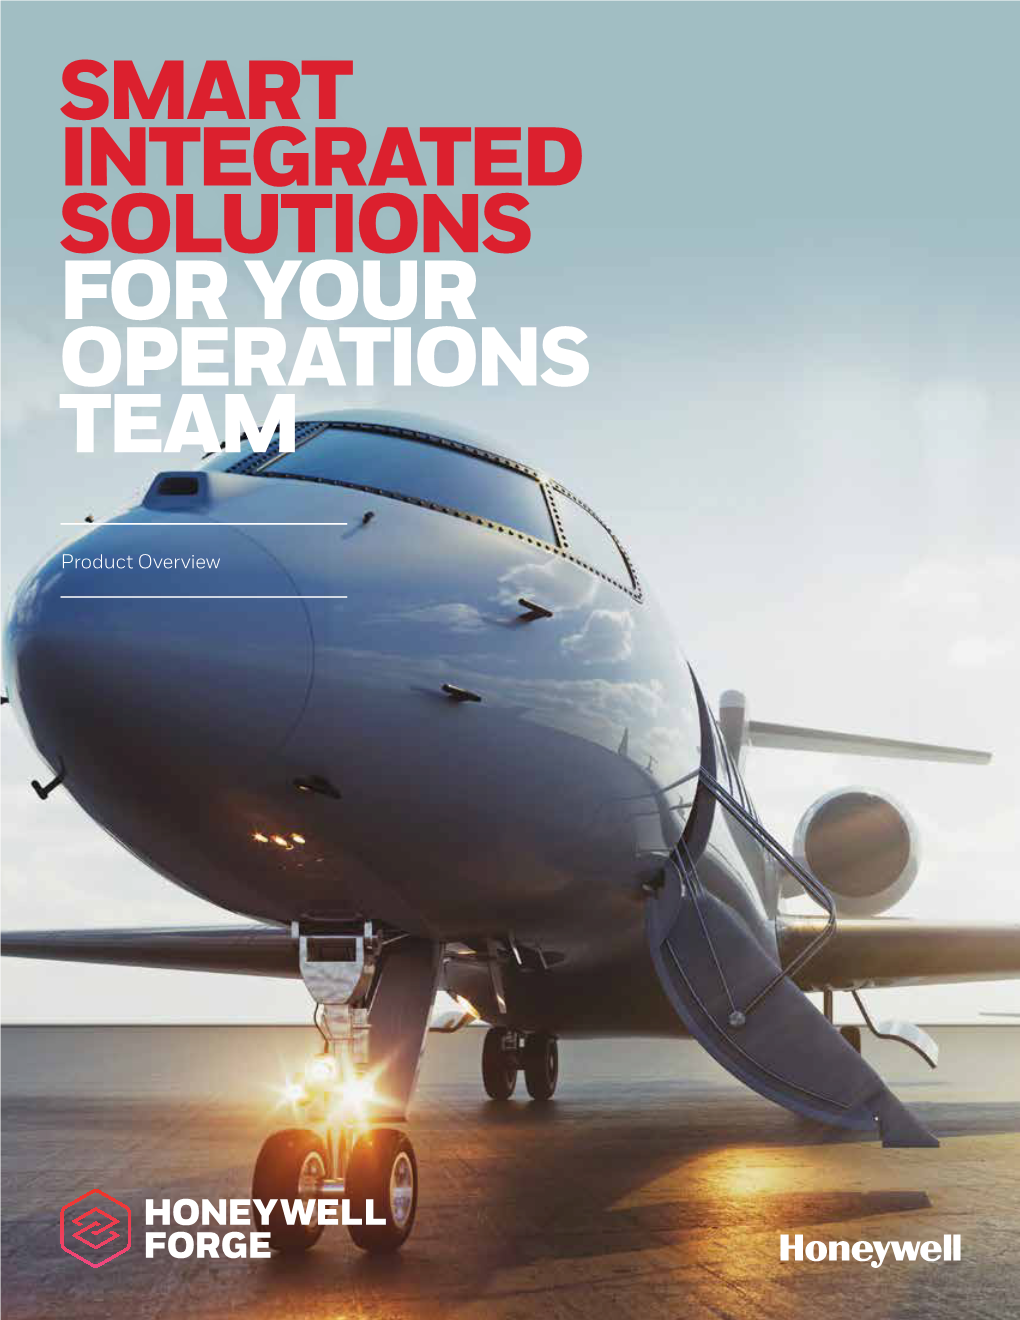 Honeywell Forge for Business Aviation